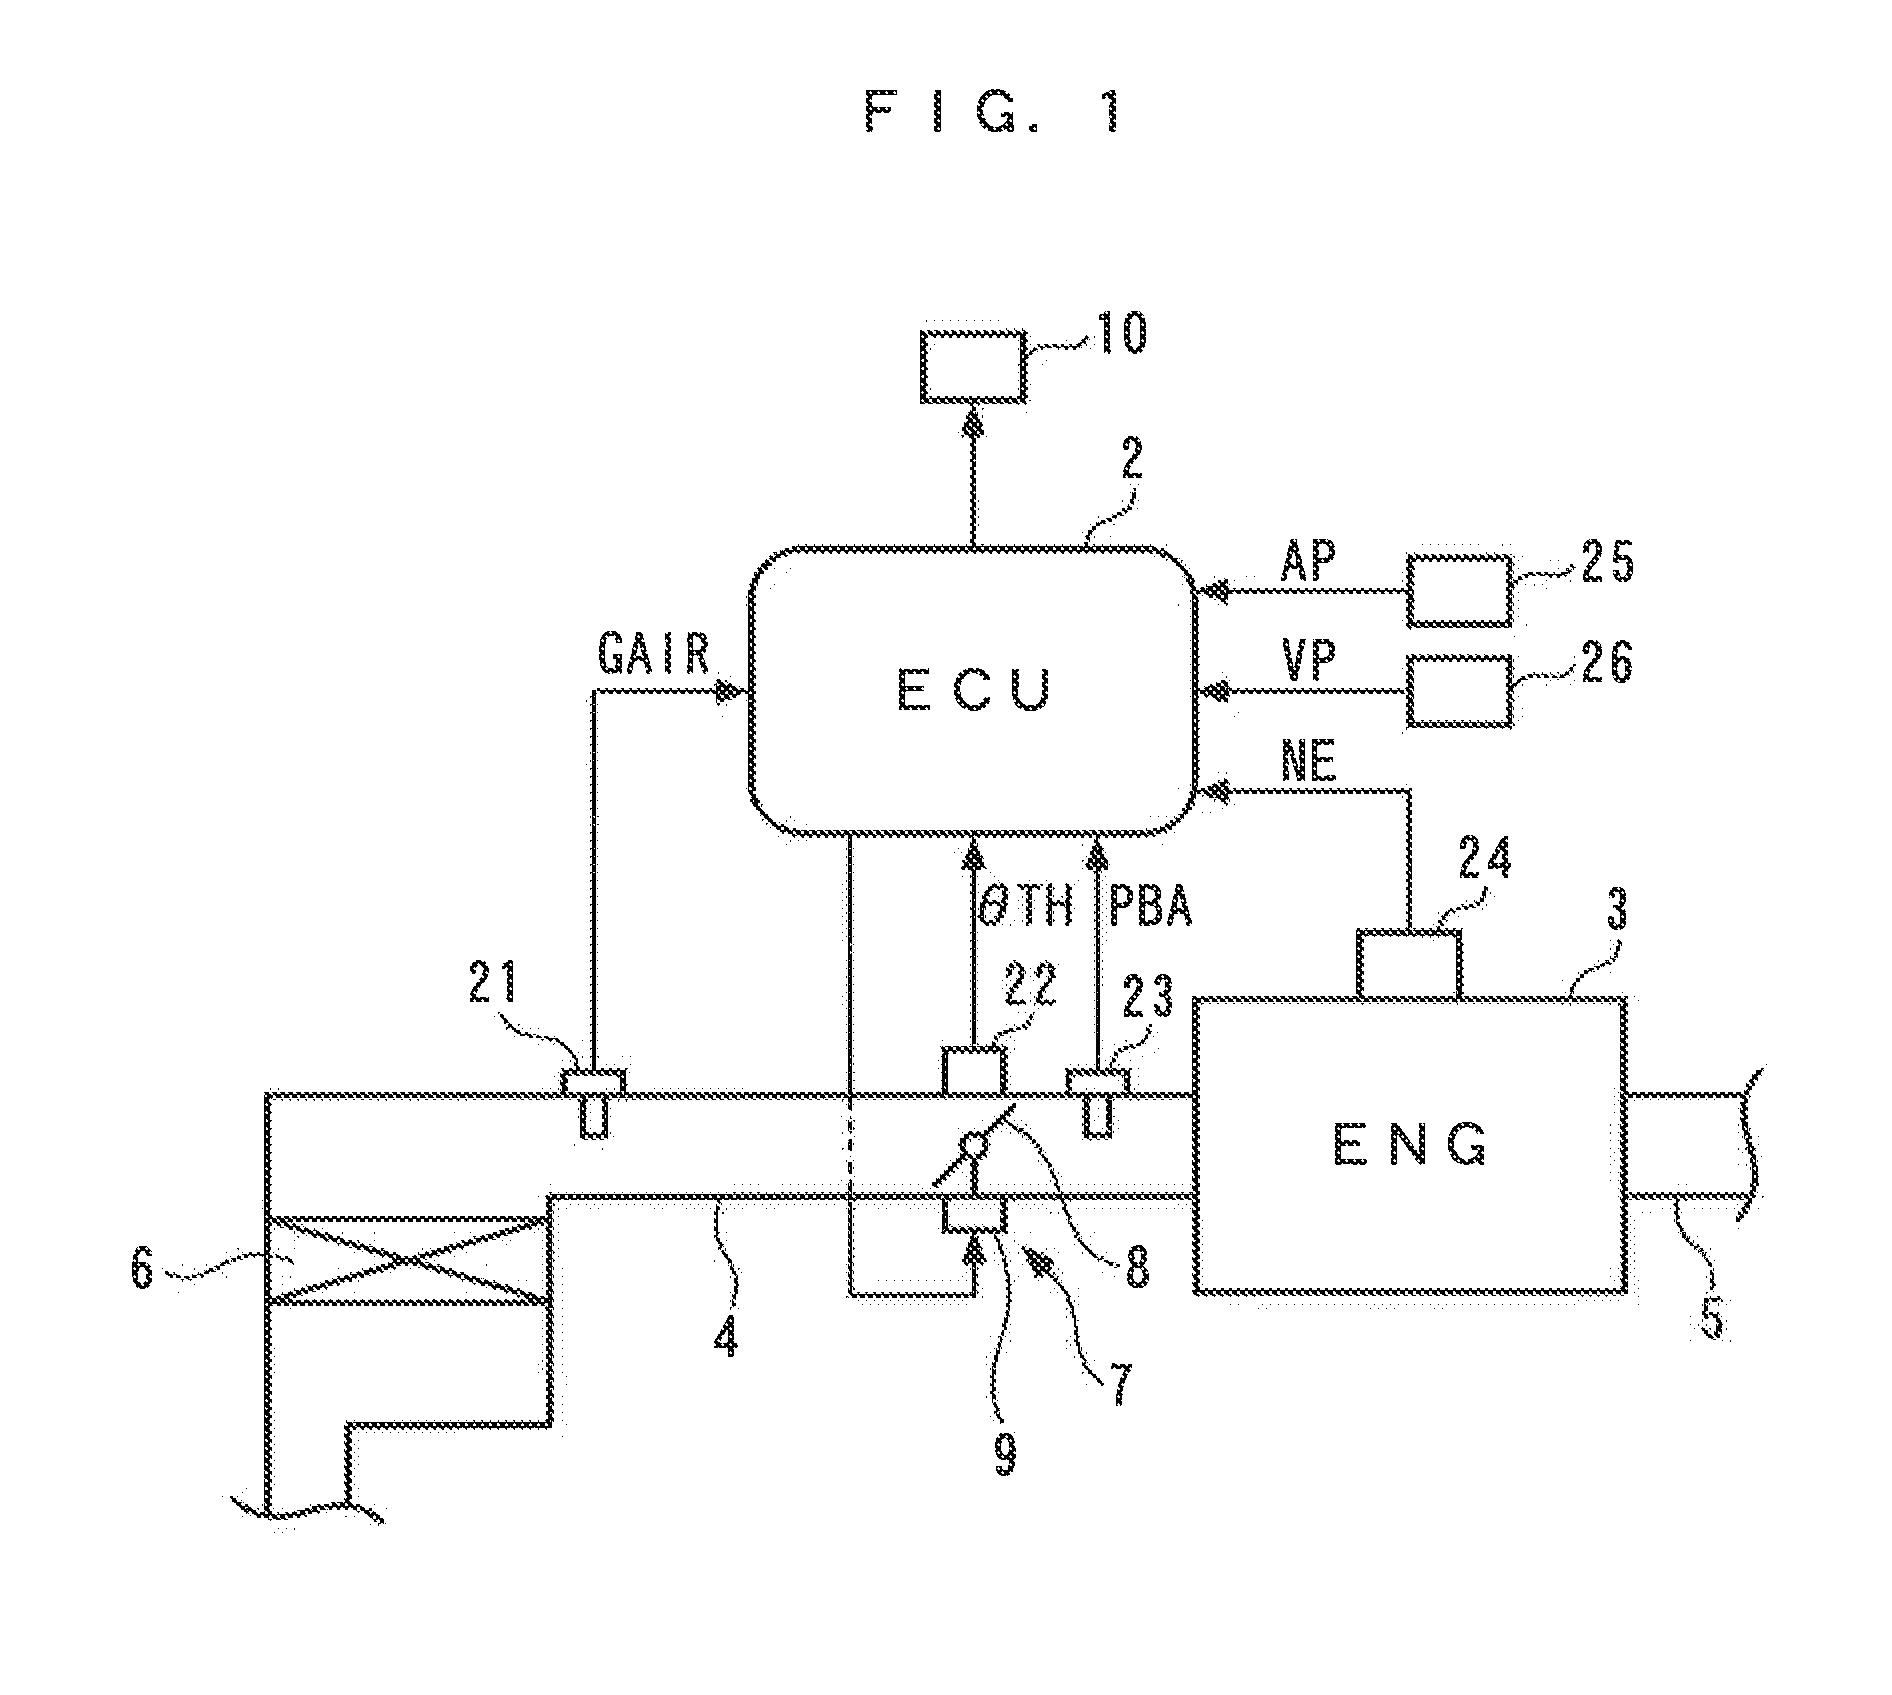 End-of-life estimation device for air cleaner